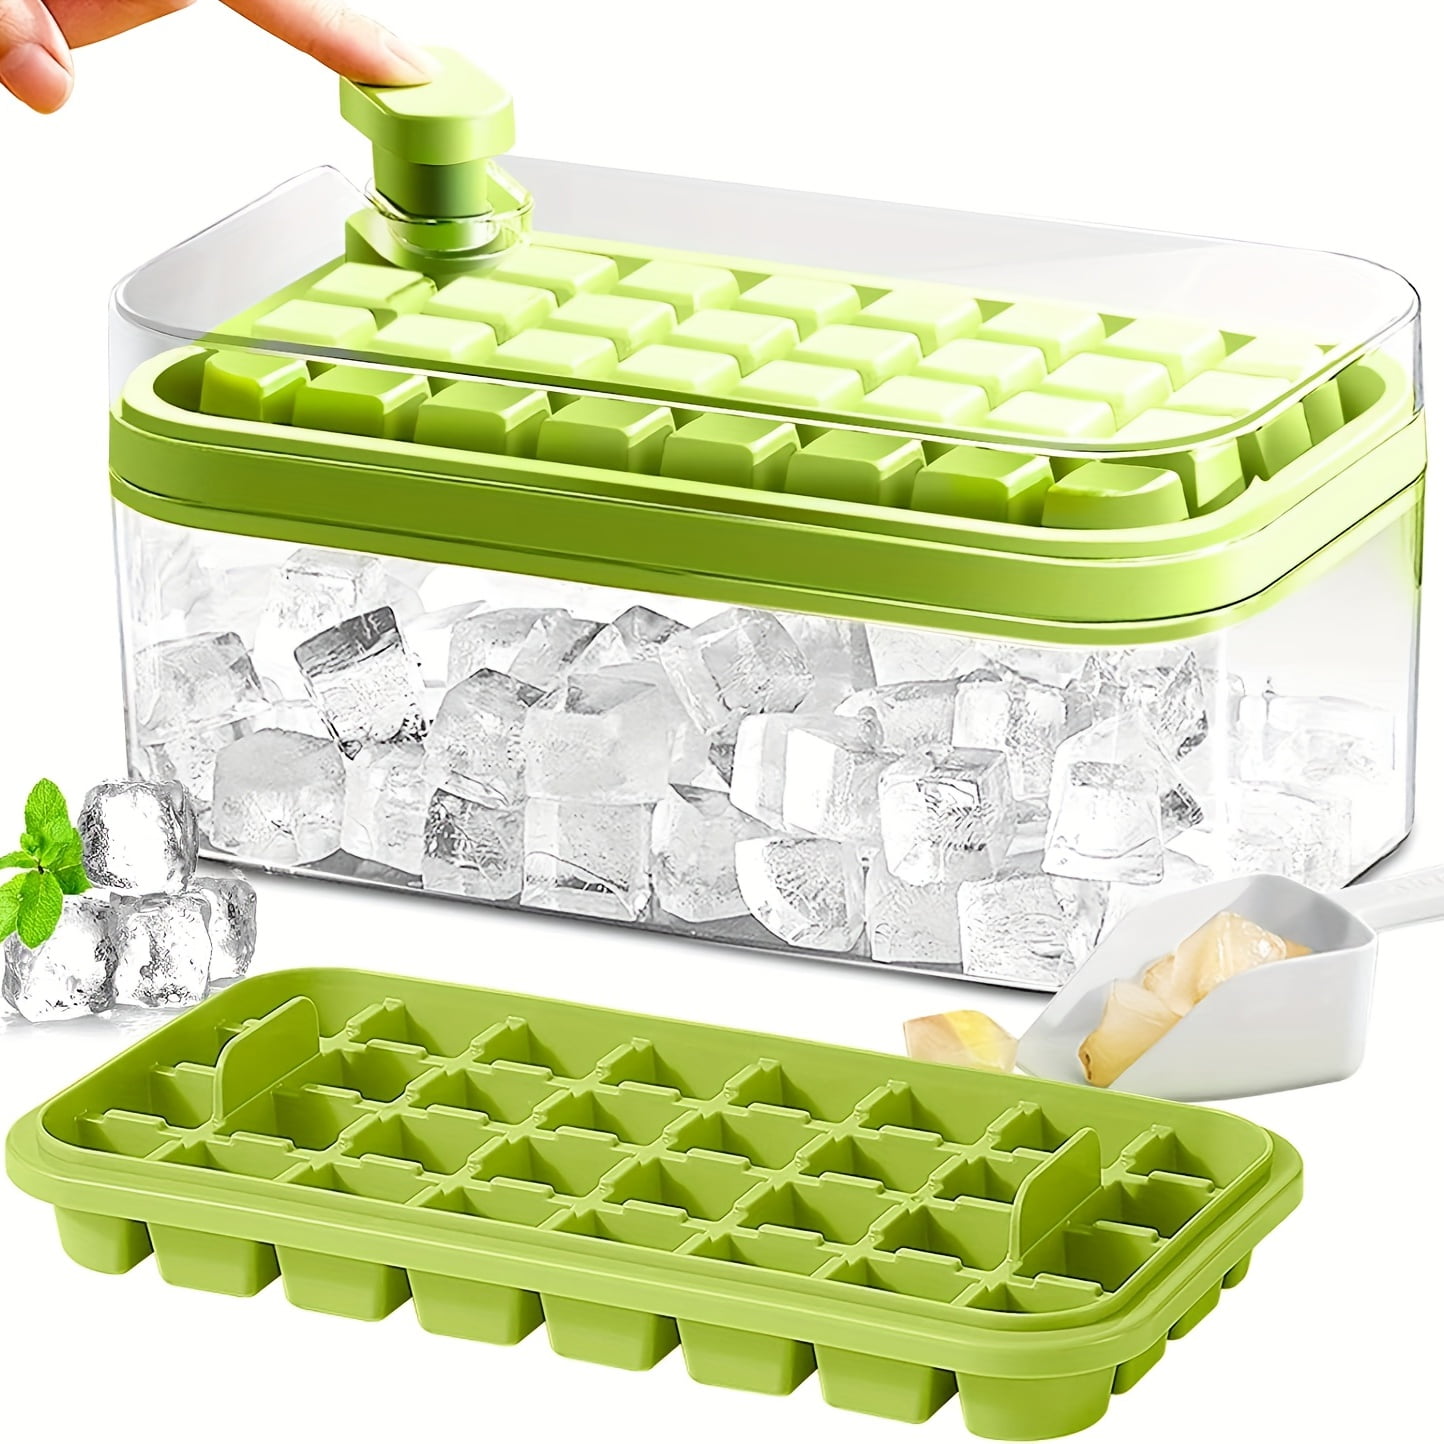 Do you know *THIS* sneaky Ice Cube Tray Trick? 😱 (you should